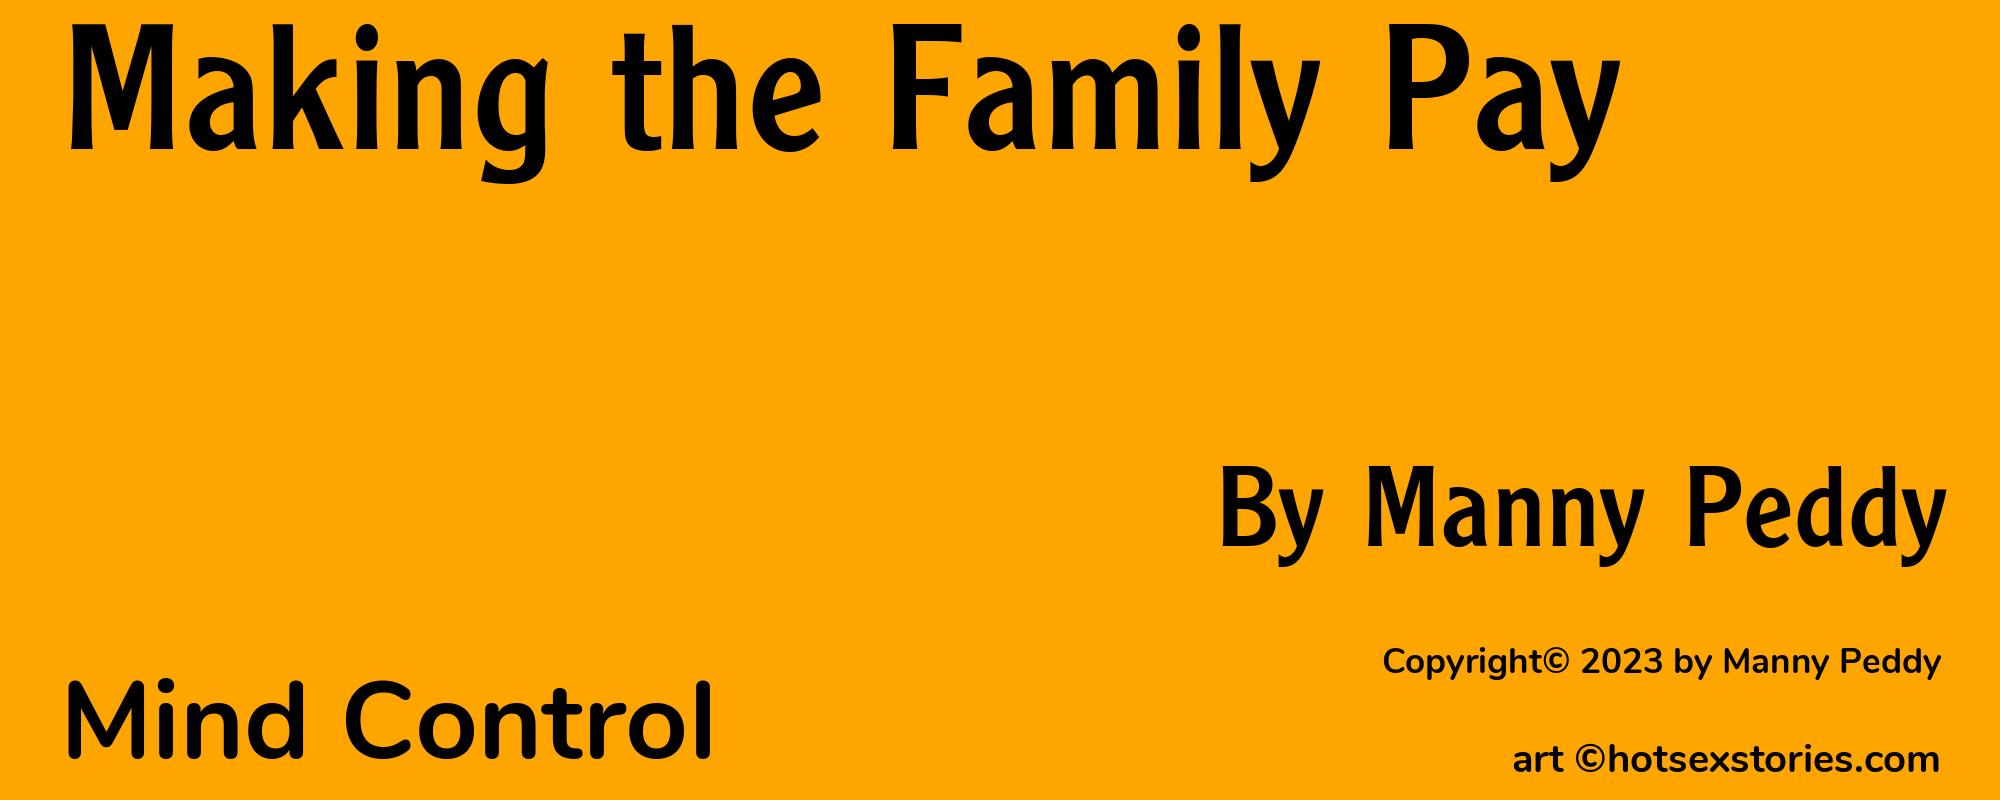 Making the Family Pay - Cover